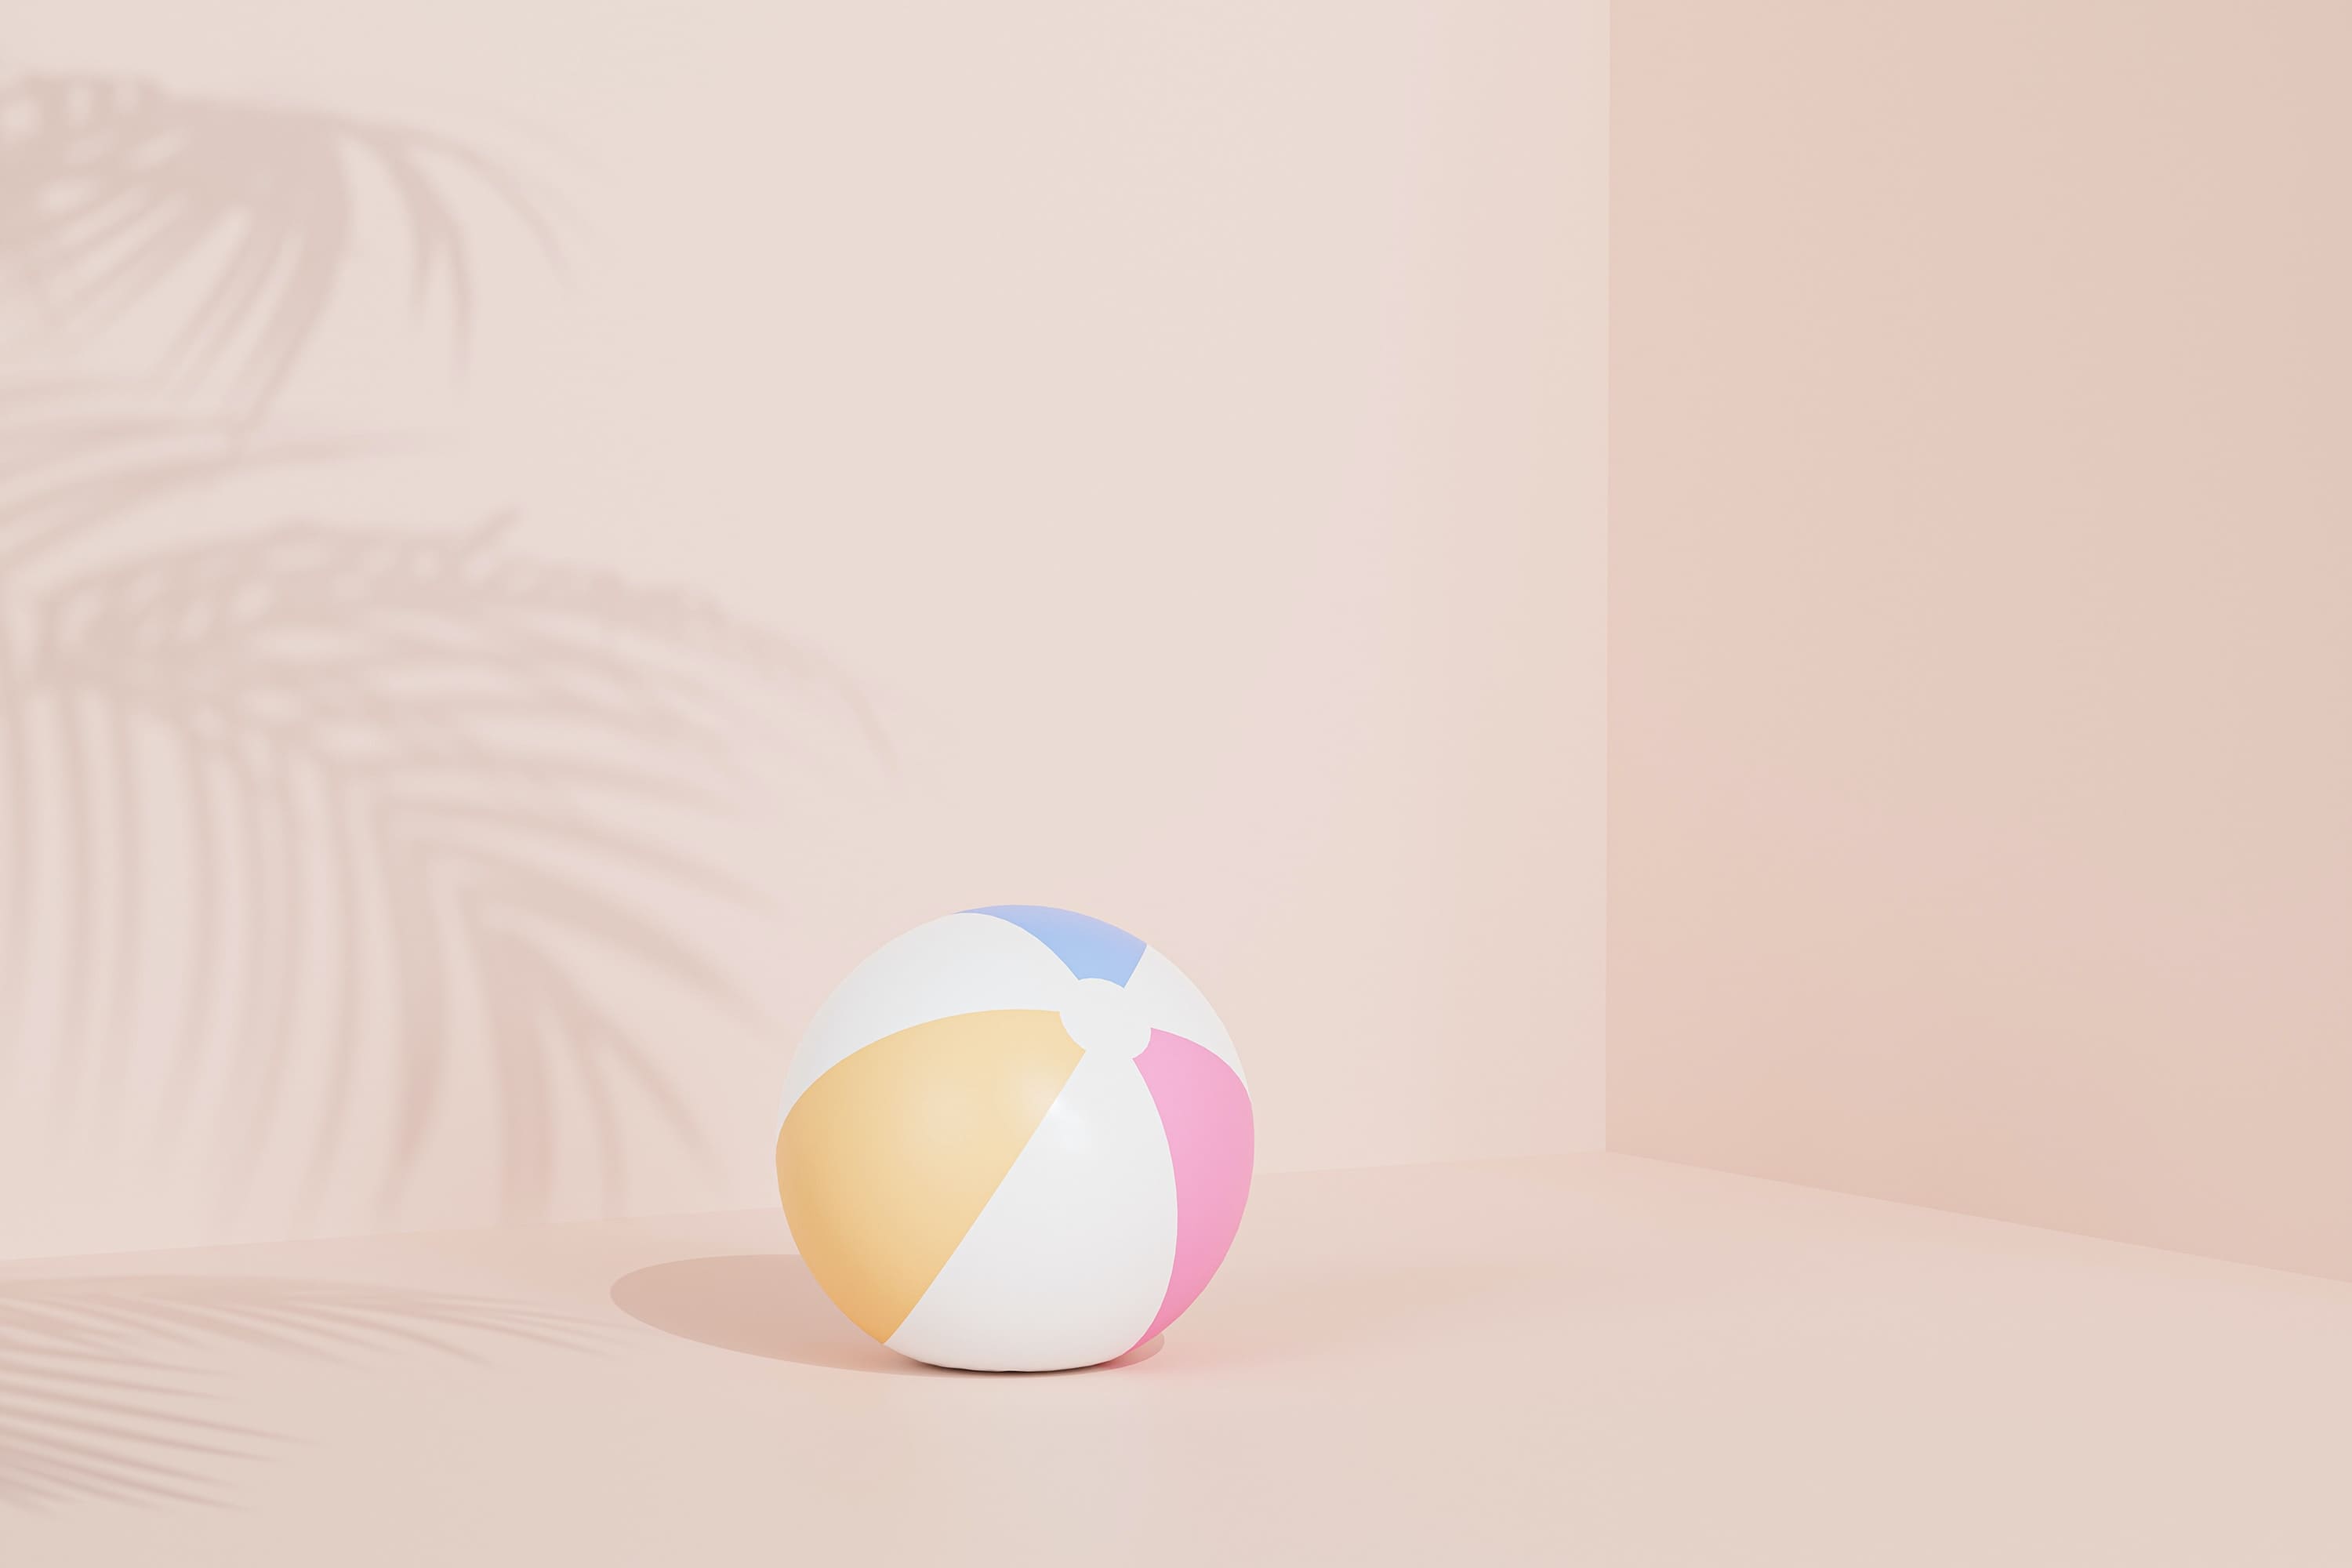 ai-generated image of a beach ball